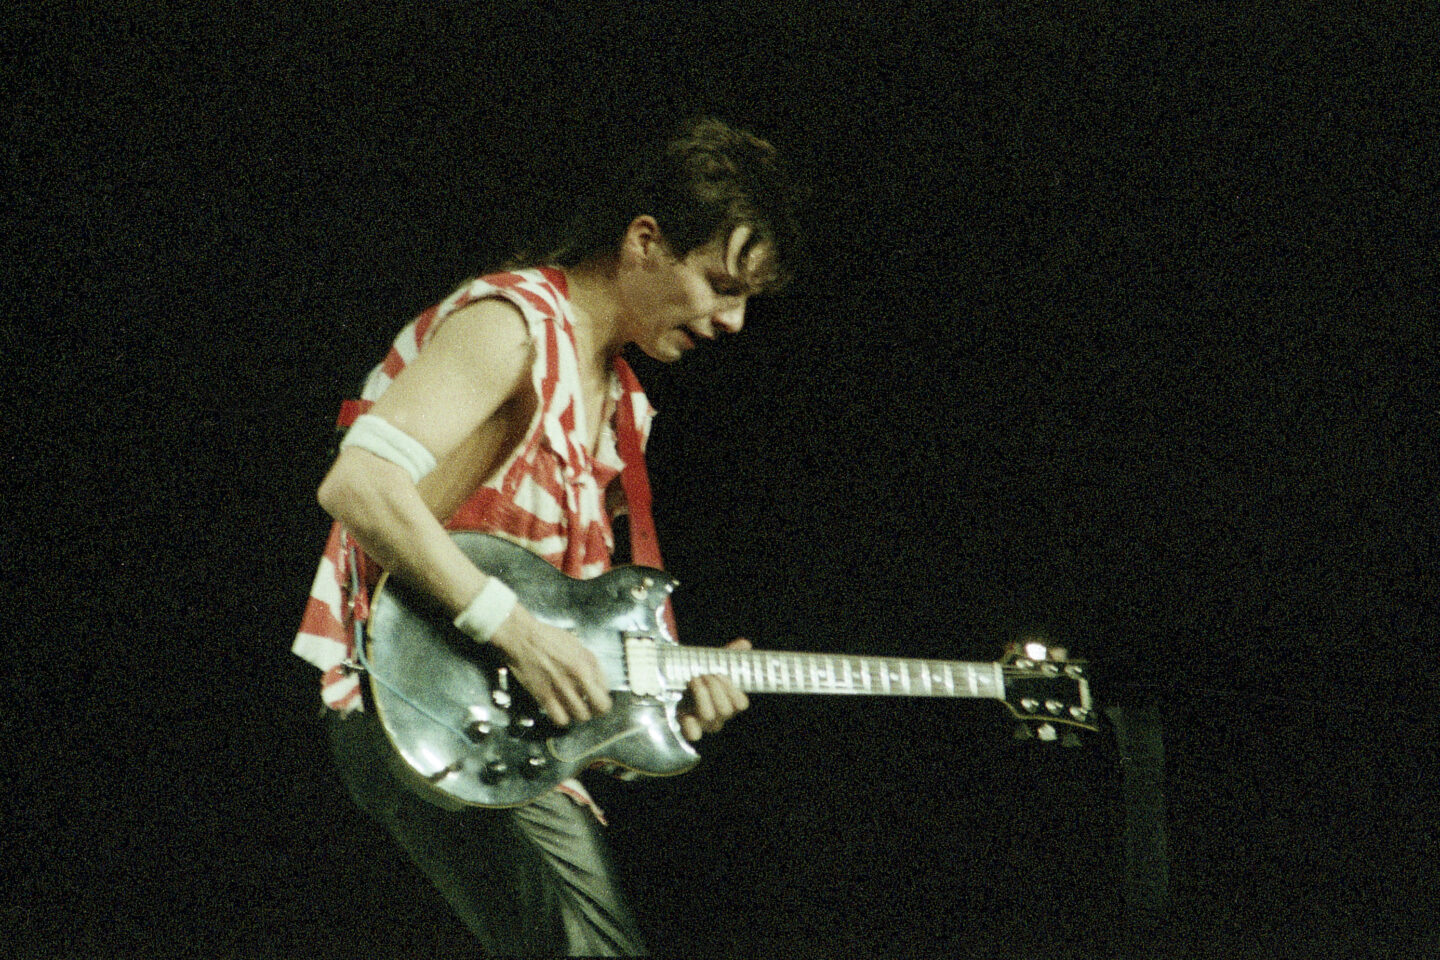 Andy Taylor